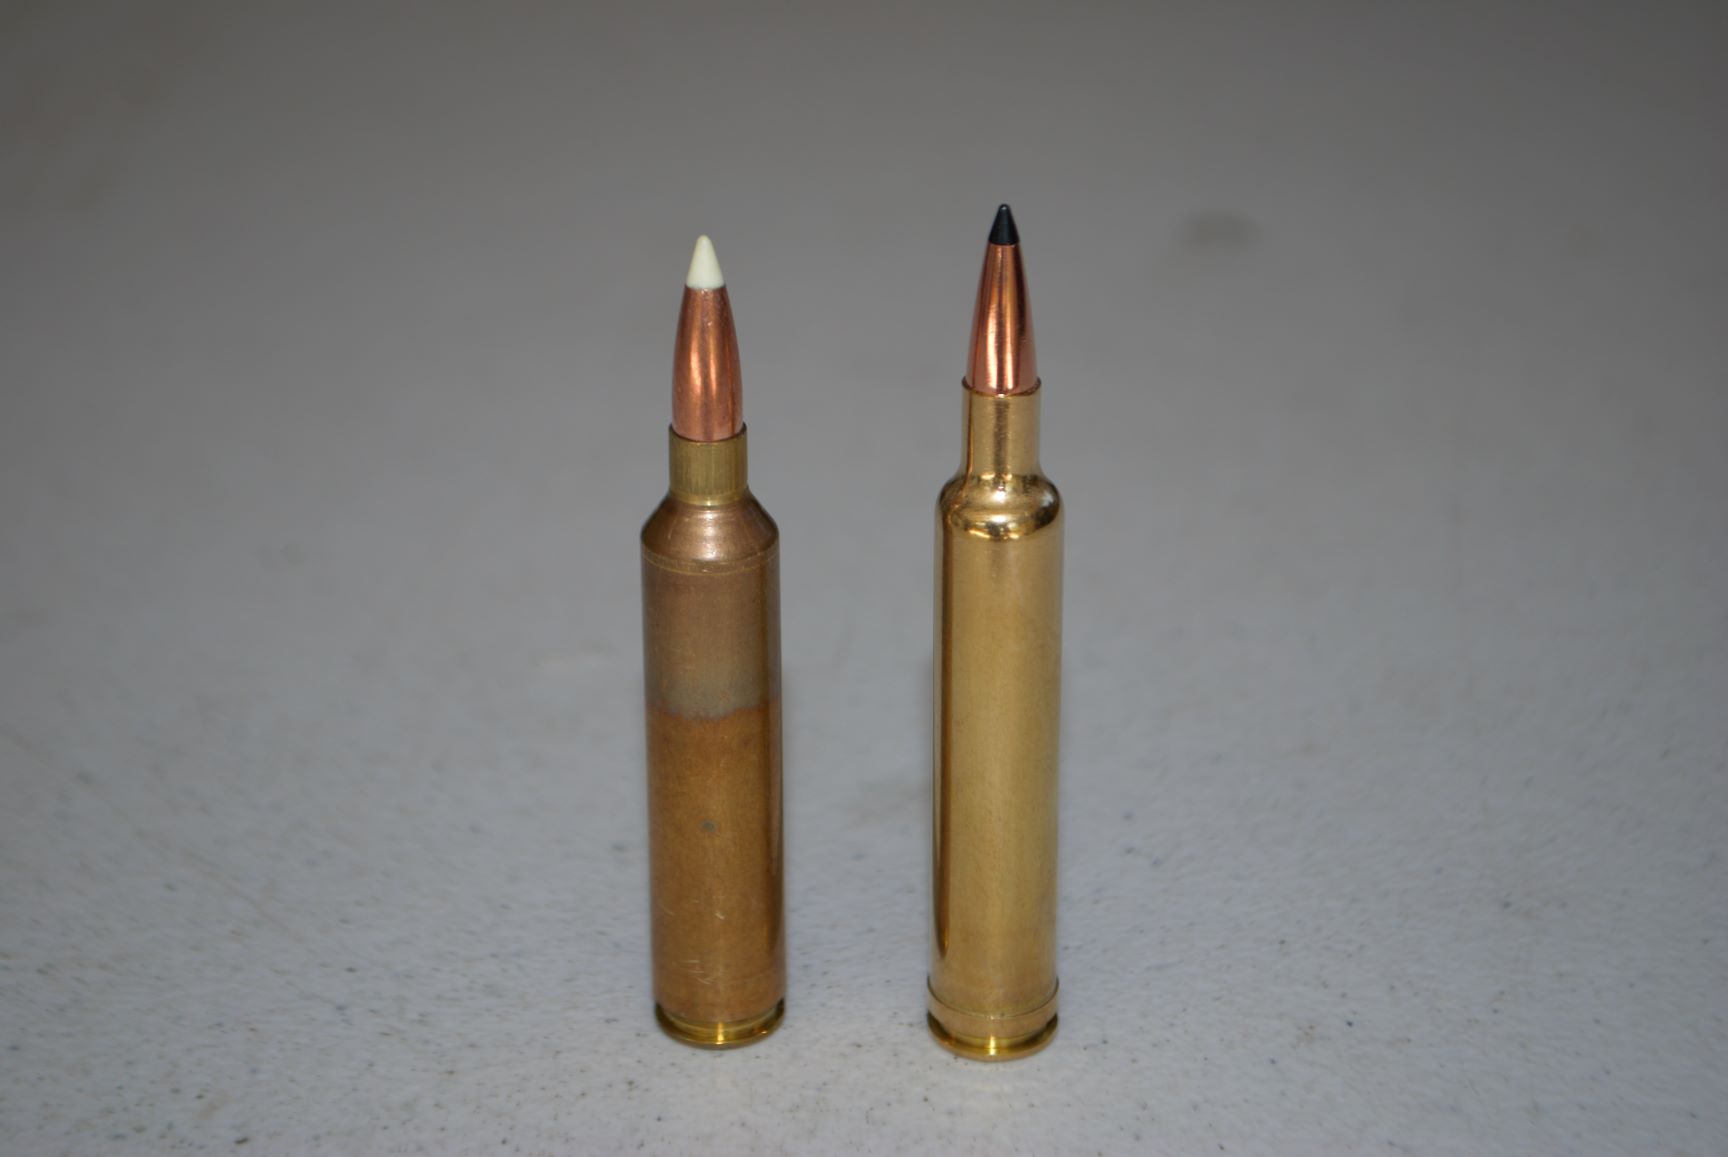 The 26 Nosler and 6.5-.300 Weatherby Magnum are the two “very fast” 6.5mm factory cartridges. Both are capable of propelling a 140-grain bullet above 3400 fps. This makes them among the flattest-shooting hunting cartridges available.